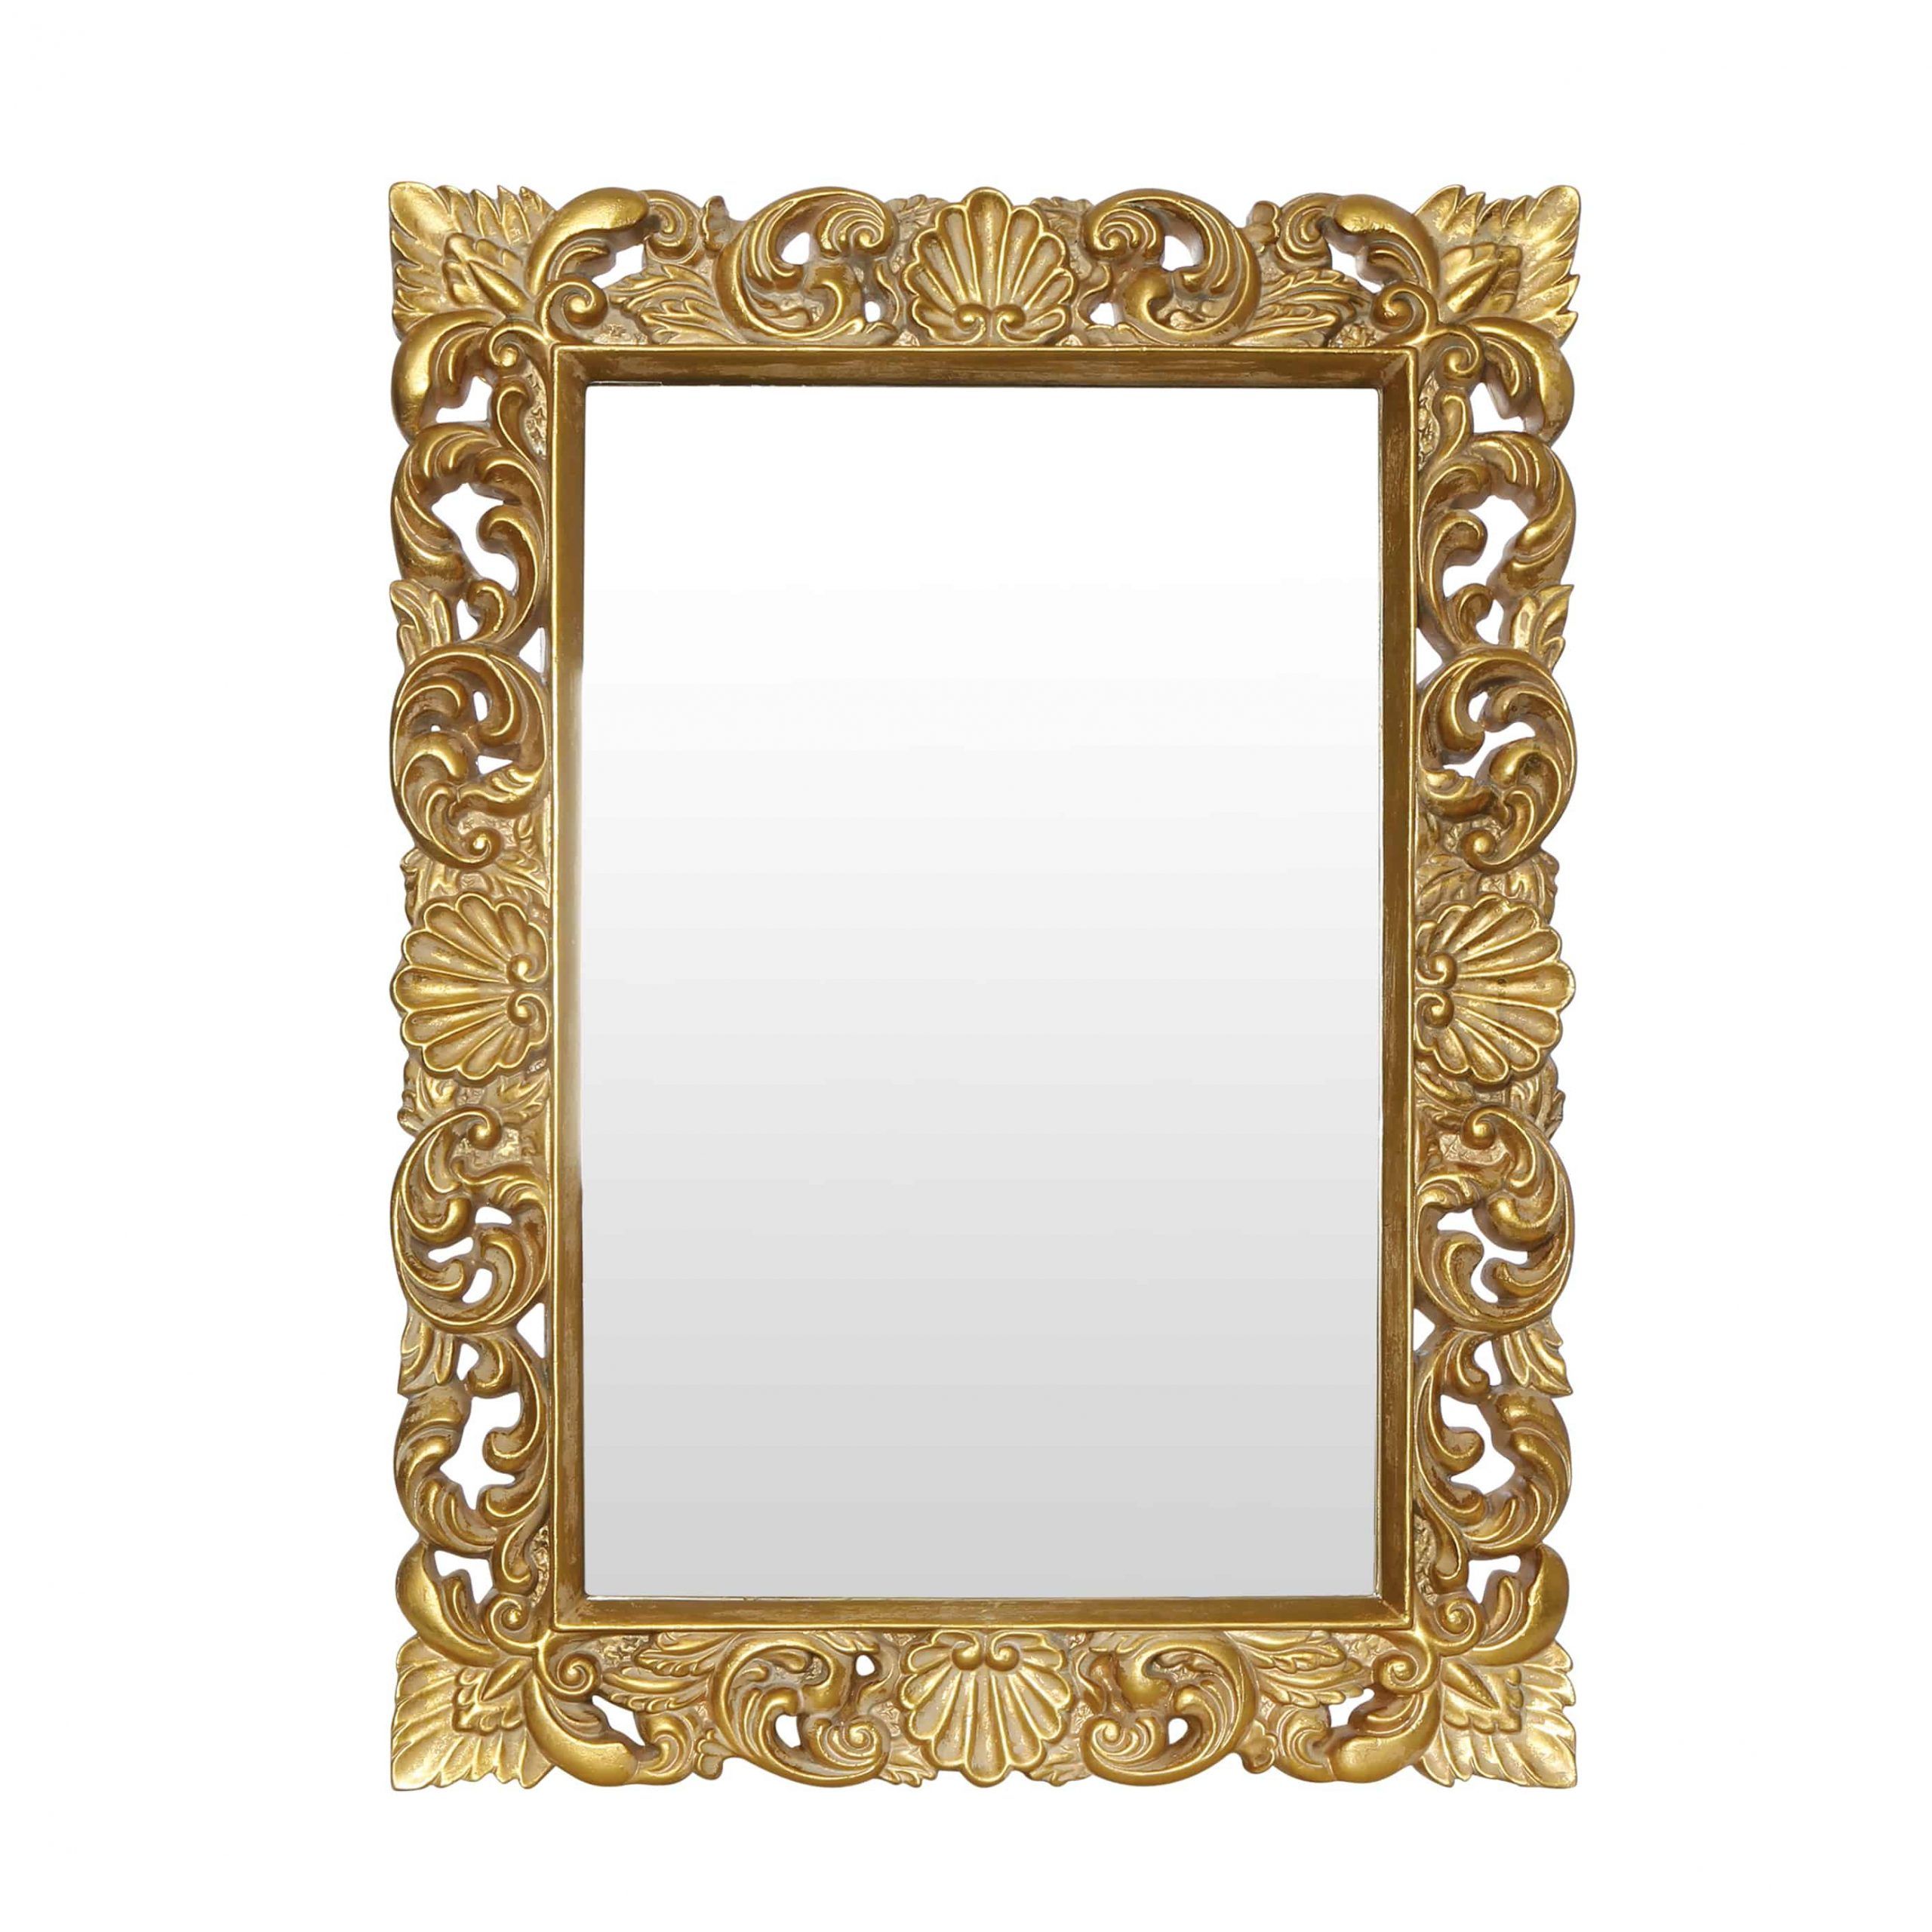 Most Recent Gold Scalloped Wall Mirrors Inside Gold Leaf Scallop Wall Mirror Rectangular – Antique Reproduction Shop (View 4 of 15)